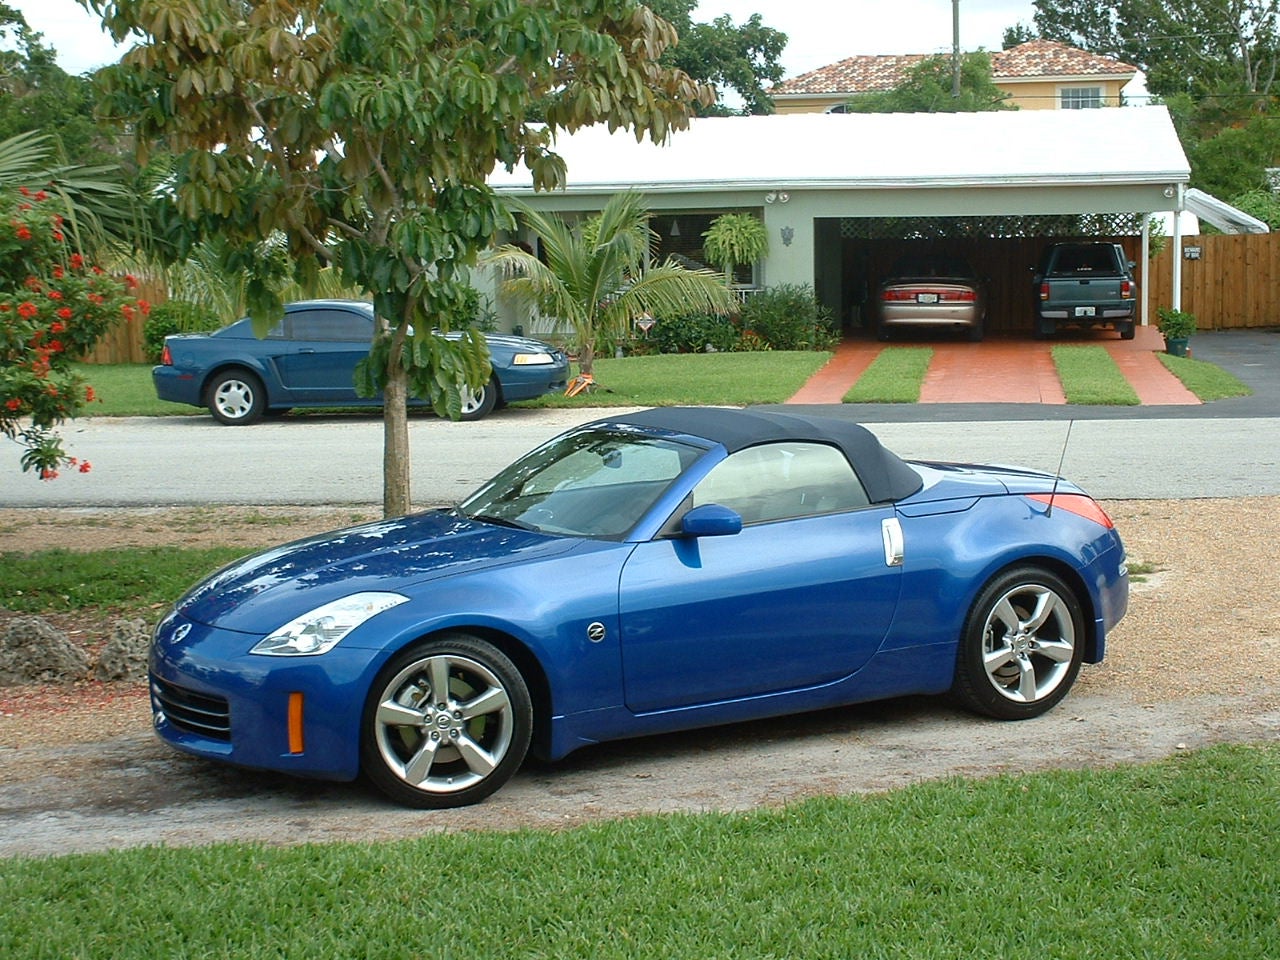 2006 Nissan 350z touring roadster specs #3